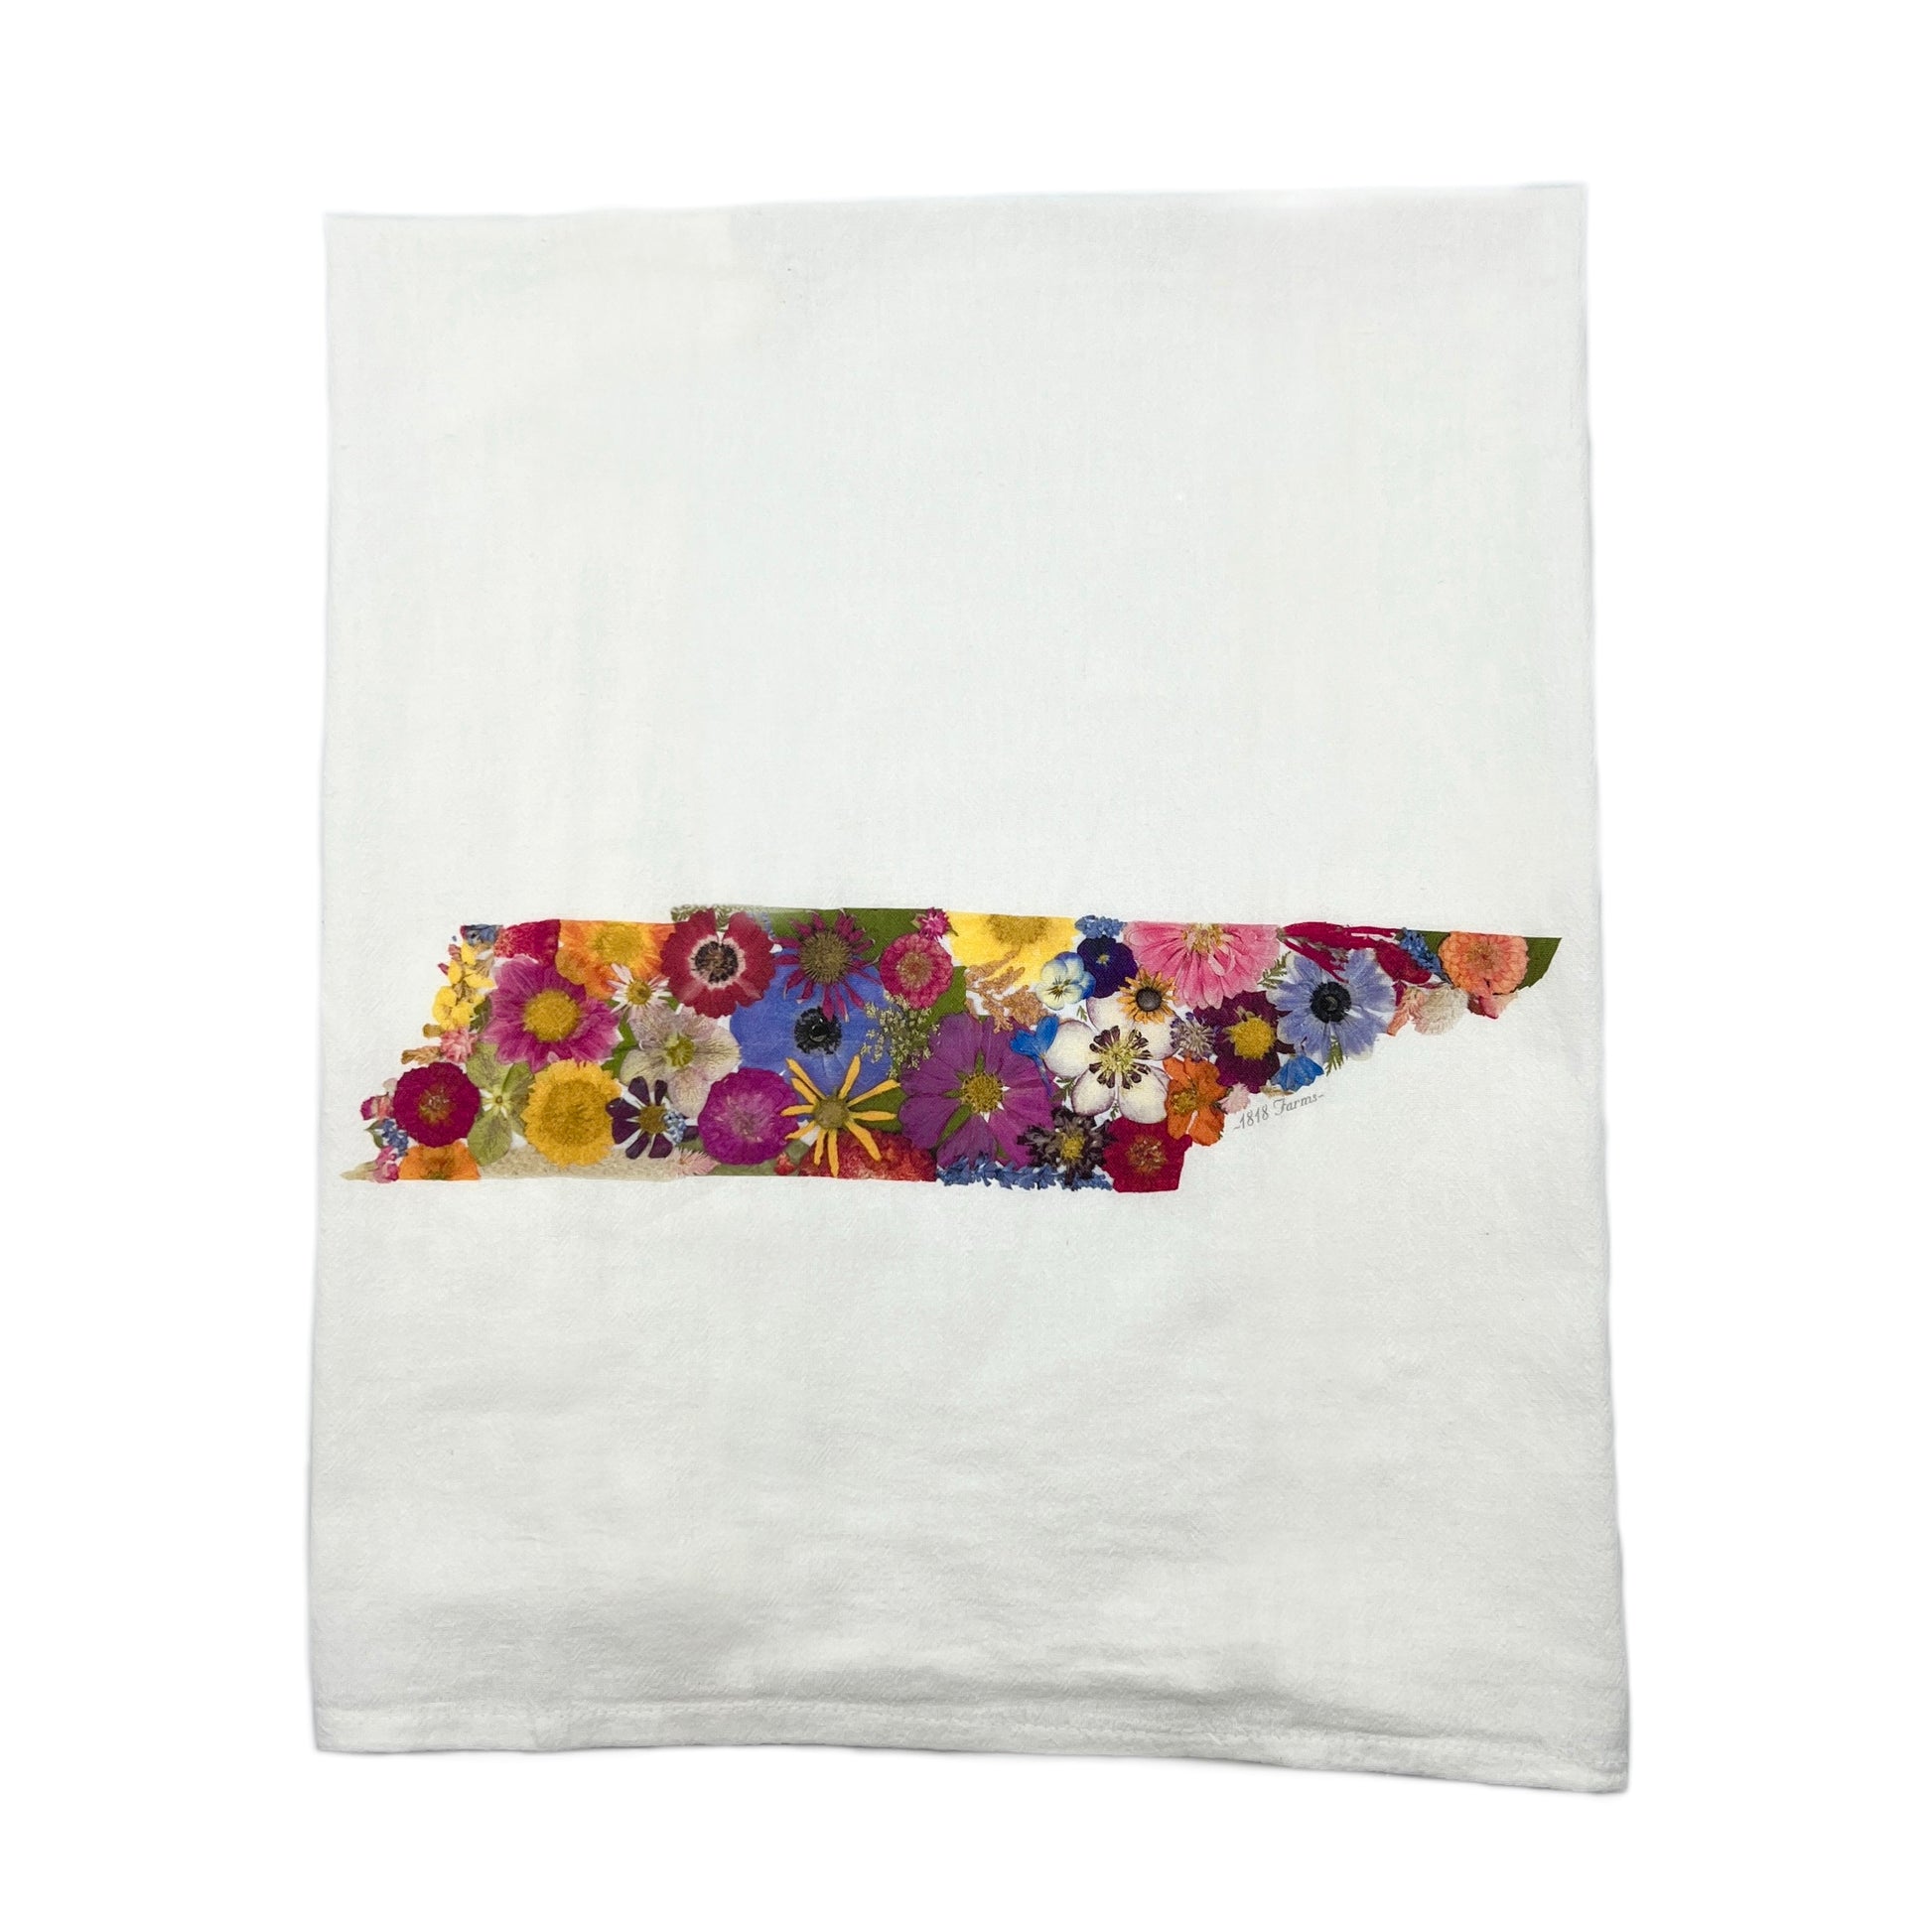 Tennessee Themed Flour Sack Towel Featuring Dried, Pressed Flowers - "Where I Bloom" Collection Towel 1818 Farms   